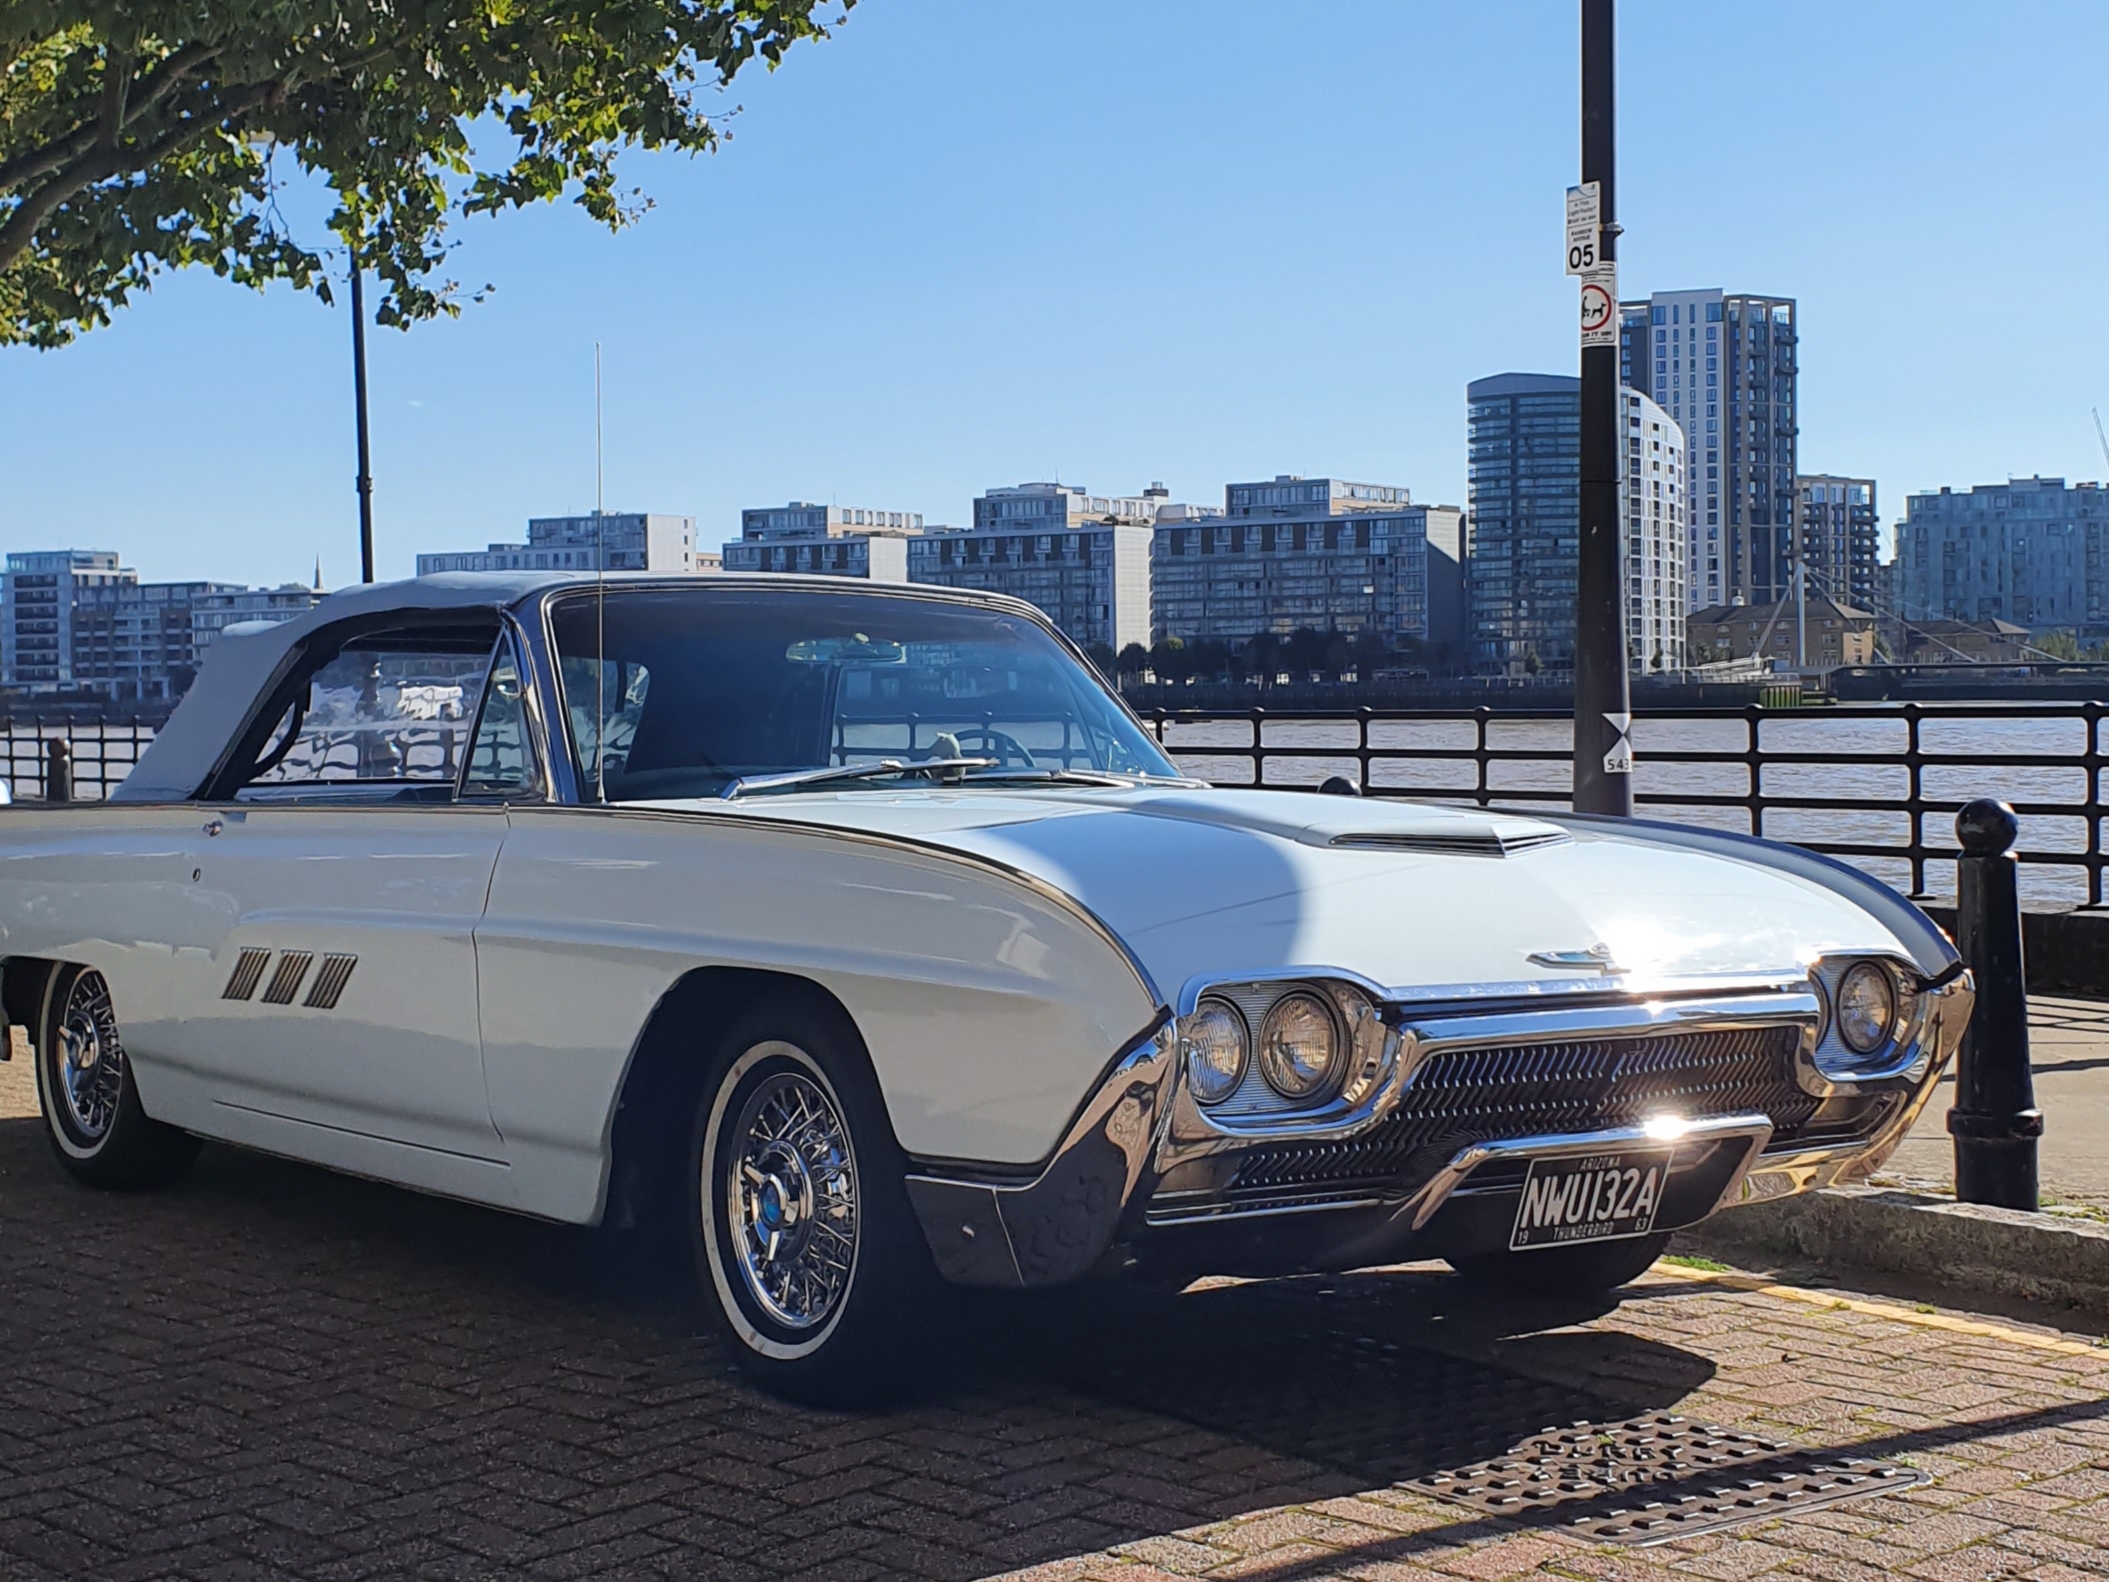 1963 Convertible by the River Thames